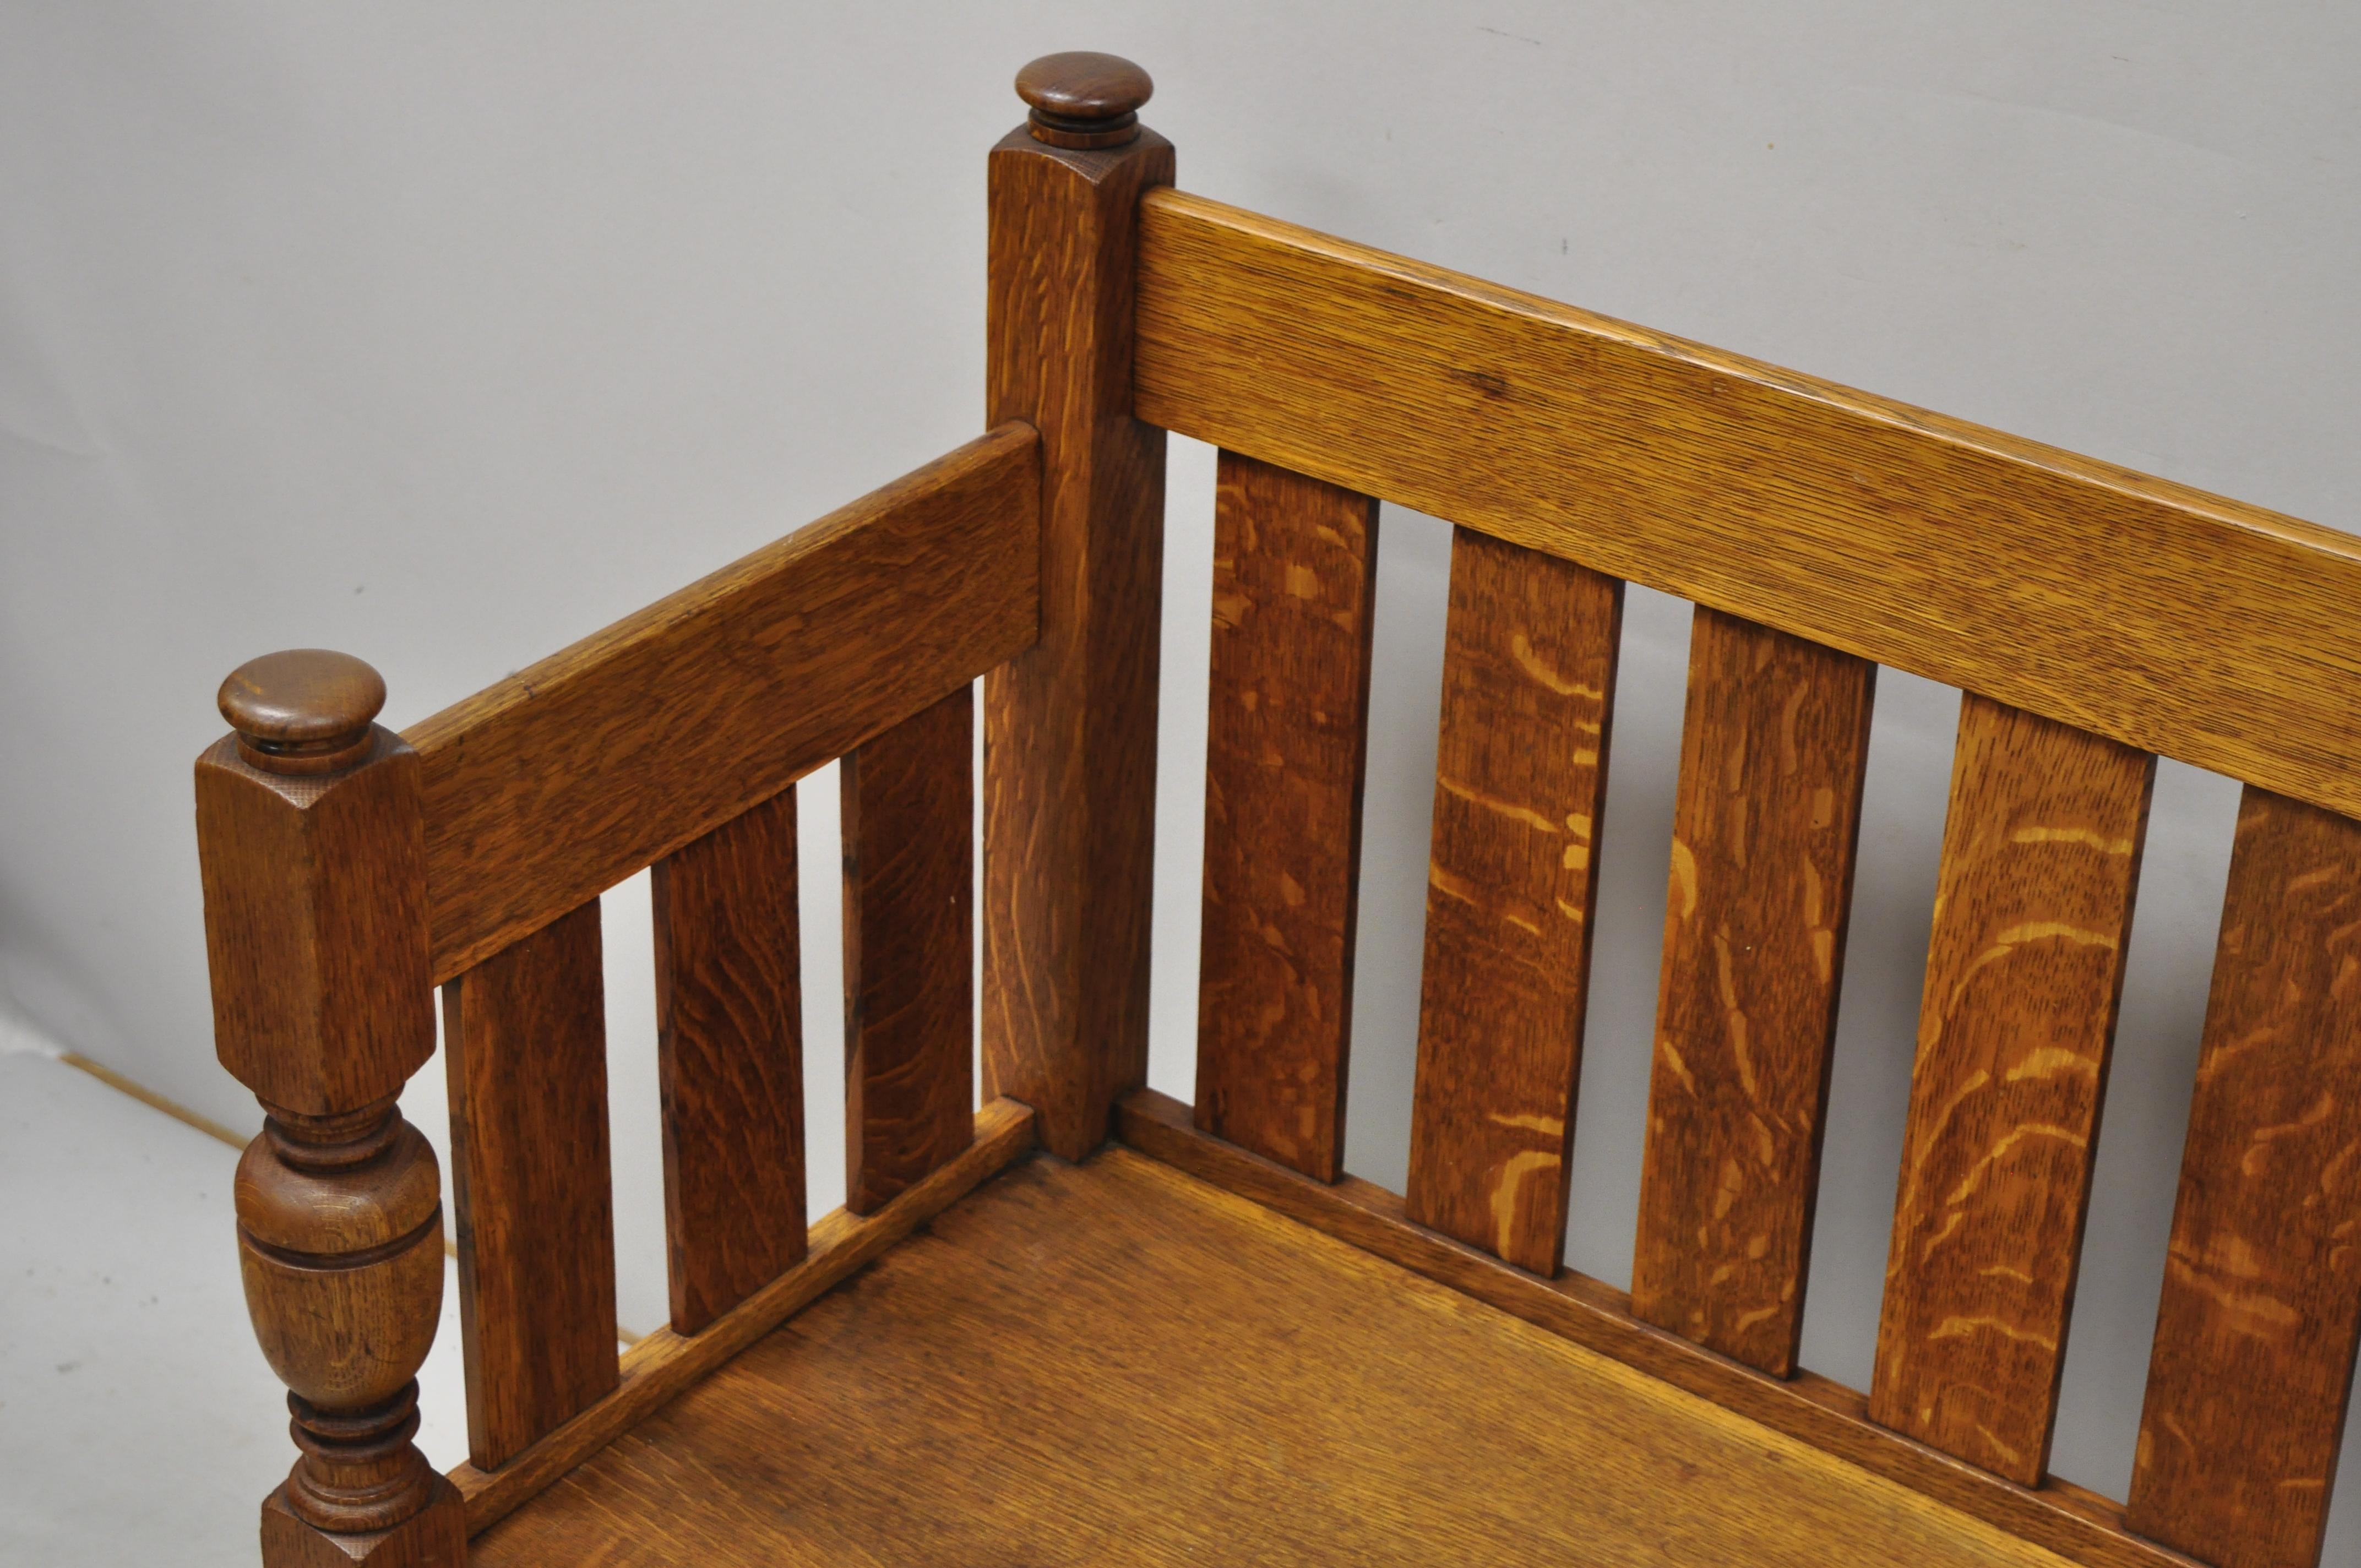 Antique Stickley Brothers Quaint Furniture oak slat back hall bench Arts & Crafts. Item features a slatted back and sides, solid wood construction, beautiful wood grain, original label, very nice antique item, quality American craftsmanship, circa